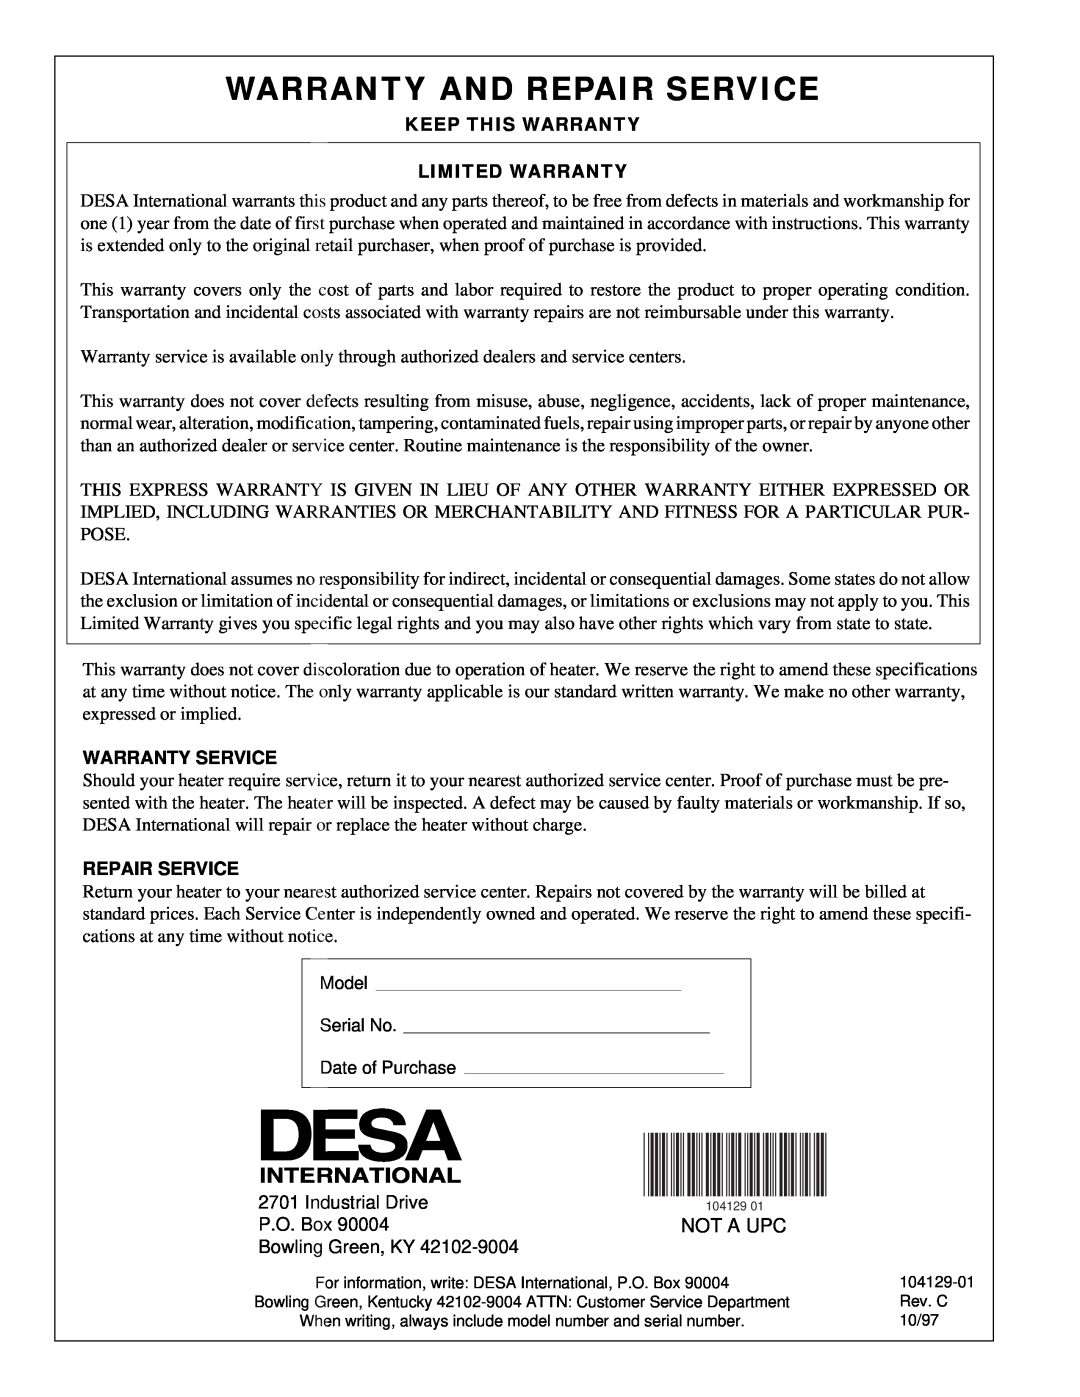 Desa TC100R owner manual Warranty And Repair Service, Not A Upc, Keep This Warranty Limited Warranty, Warranty Service 